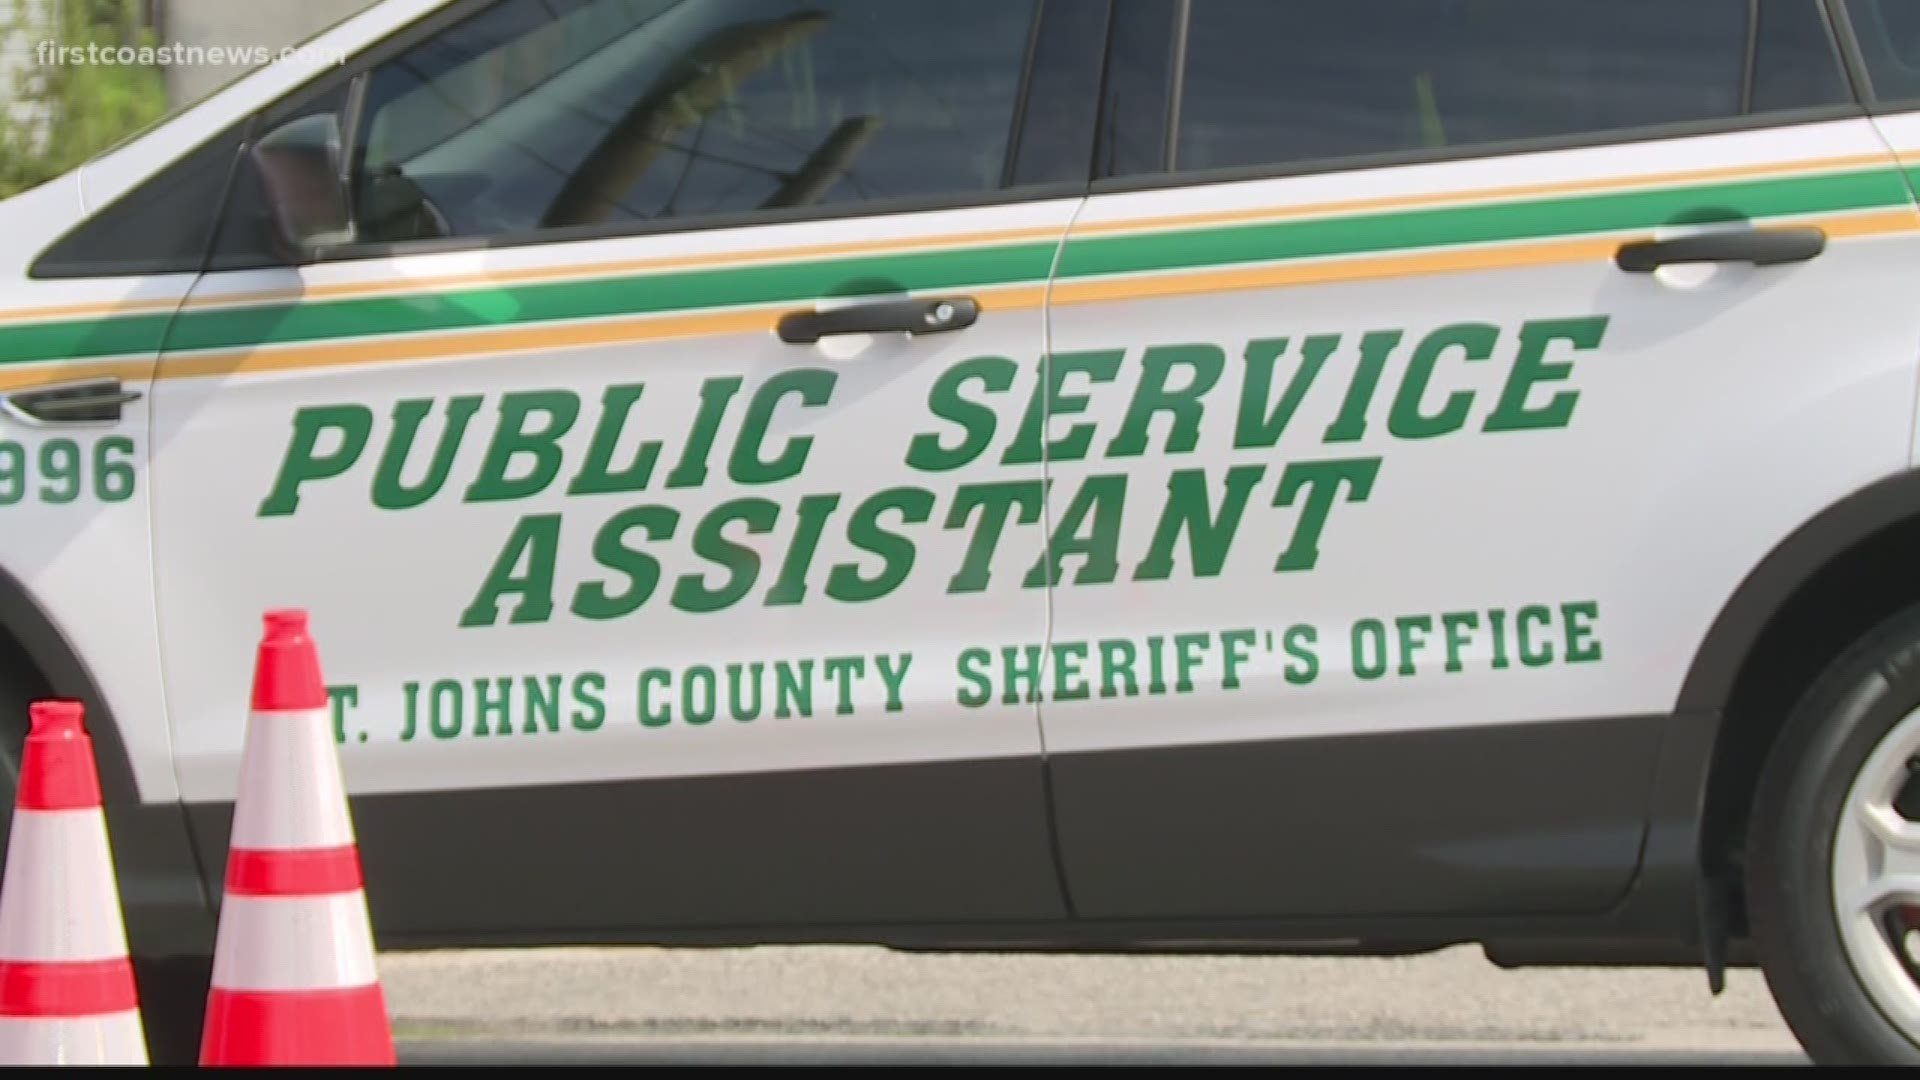 A man is dead and a woman is seriously injured after reportedly stealing a St. Johns County deputy's personal vehicle and getting into a crash on Kings Estate Road in St. Johns County, said Chuck Mulligan from the St. Johns County Sheriff's Office.